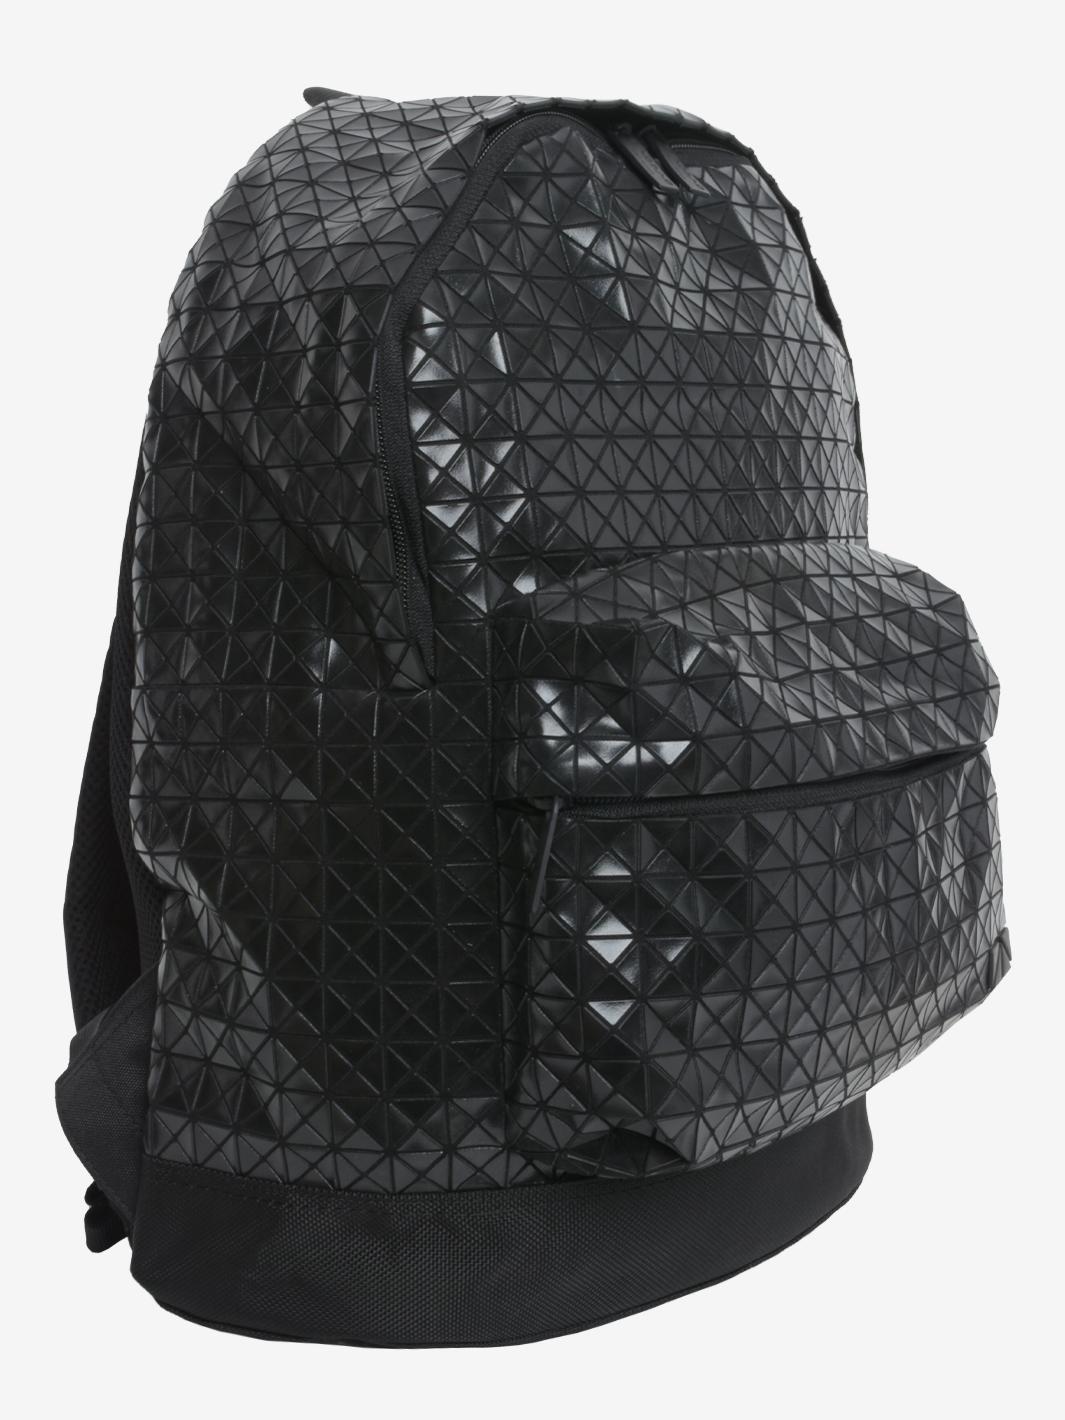 Bao Bao Issey Miyake Backpack is an unique accessory featuring Miyake's iconic embossed geometric pattern, adjustable shoulder straps, front zippered pocket, single interior compartment with zippered pocket and interior logo applique. Bao Bao are